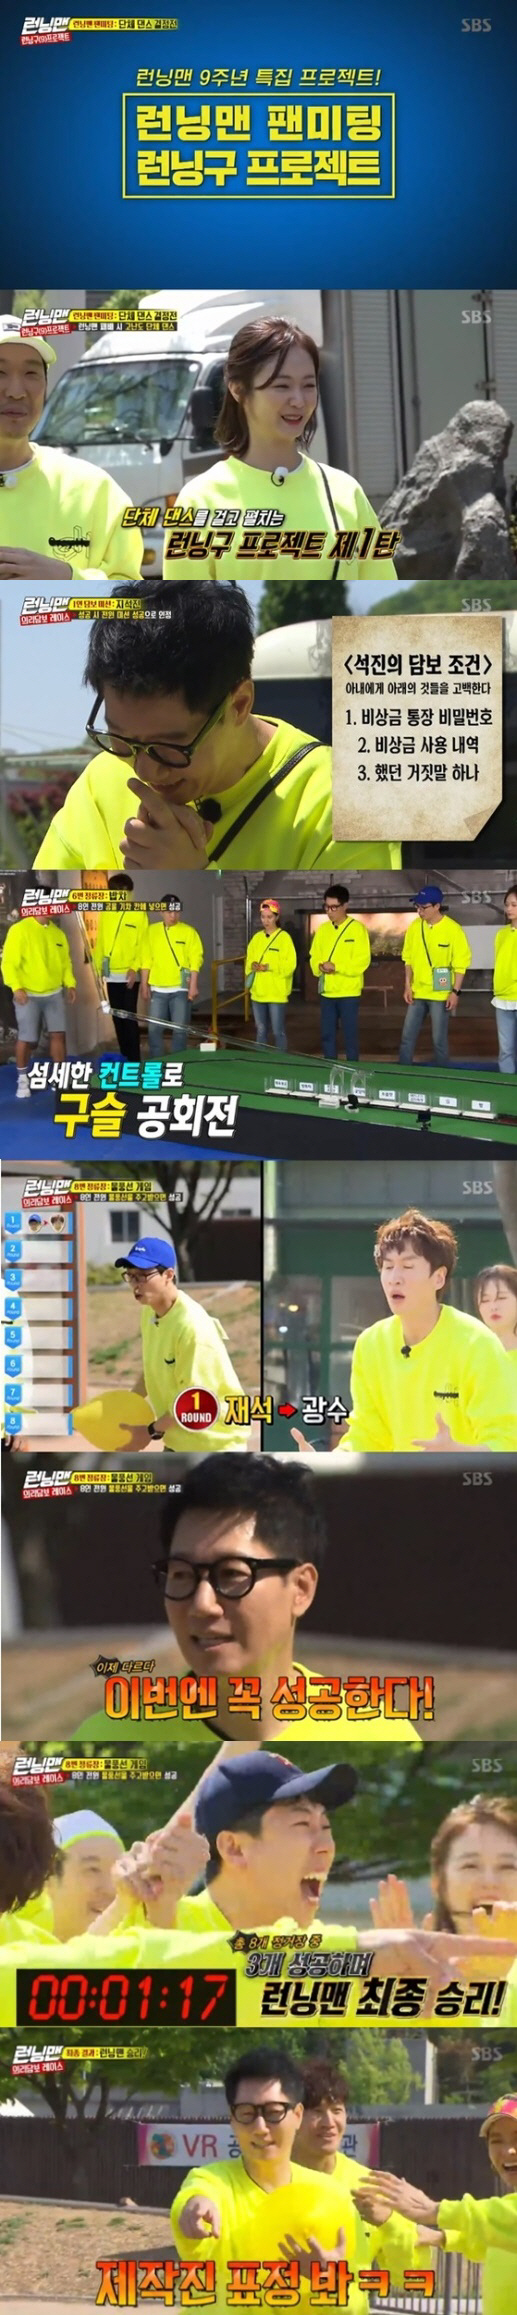 SBS Running Man first unveiled its 9th anniversary special project Running Man Fan Meeting - Running Zone Project, which greatly boosted its ratings.As previously announced, the 9th anniversary special project Running Man Fan Meeting - Running Zone Project was first released on the day.The production team and members, who had a special race for four weeks over the right to organize a fan meeting queue sheet, played their first showdown on the show with Group Dance.If the members win, they can dance in addition to the candidate dance prepared by the production team, but if they are defeated, they should dance recommended by the production team.The members were united in teamwork and started a fierce 8th round confrontation with the production team, eventually winning three wins and winning the victory.The scene had the highest audience rating of 8.9% per minute, accounting for the best one minute.